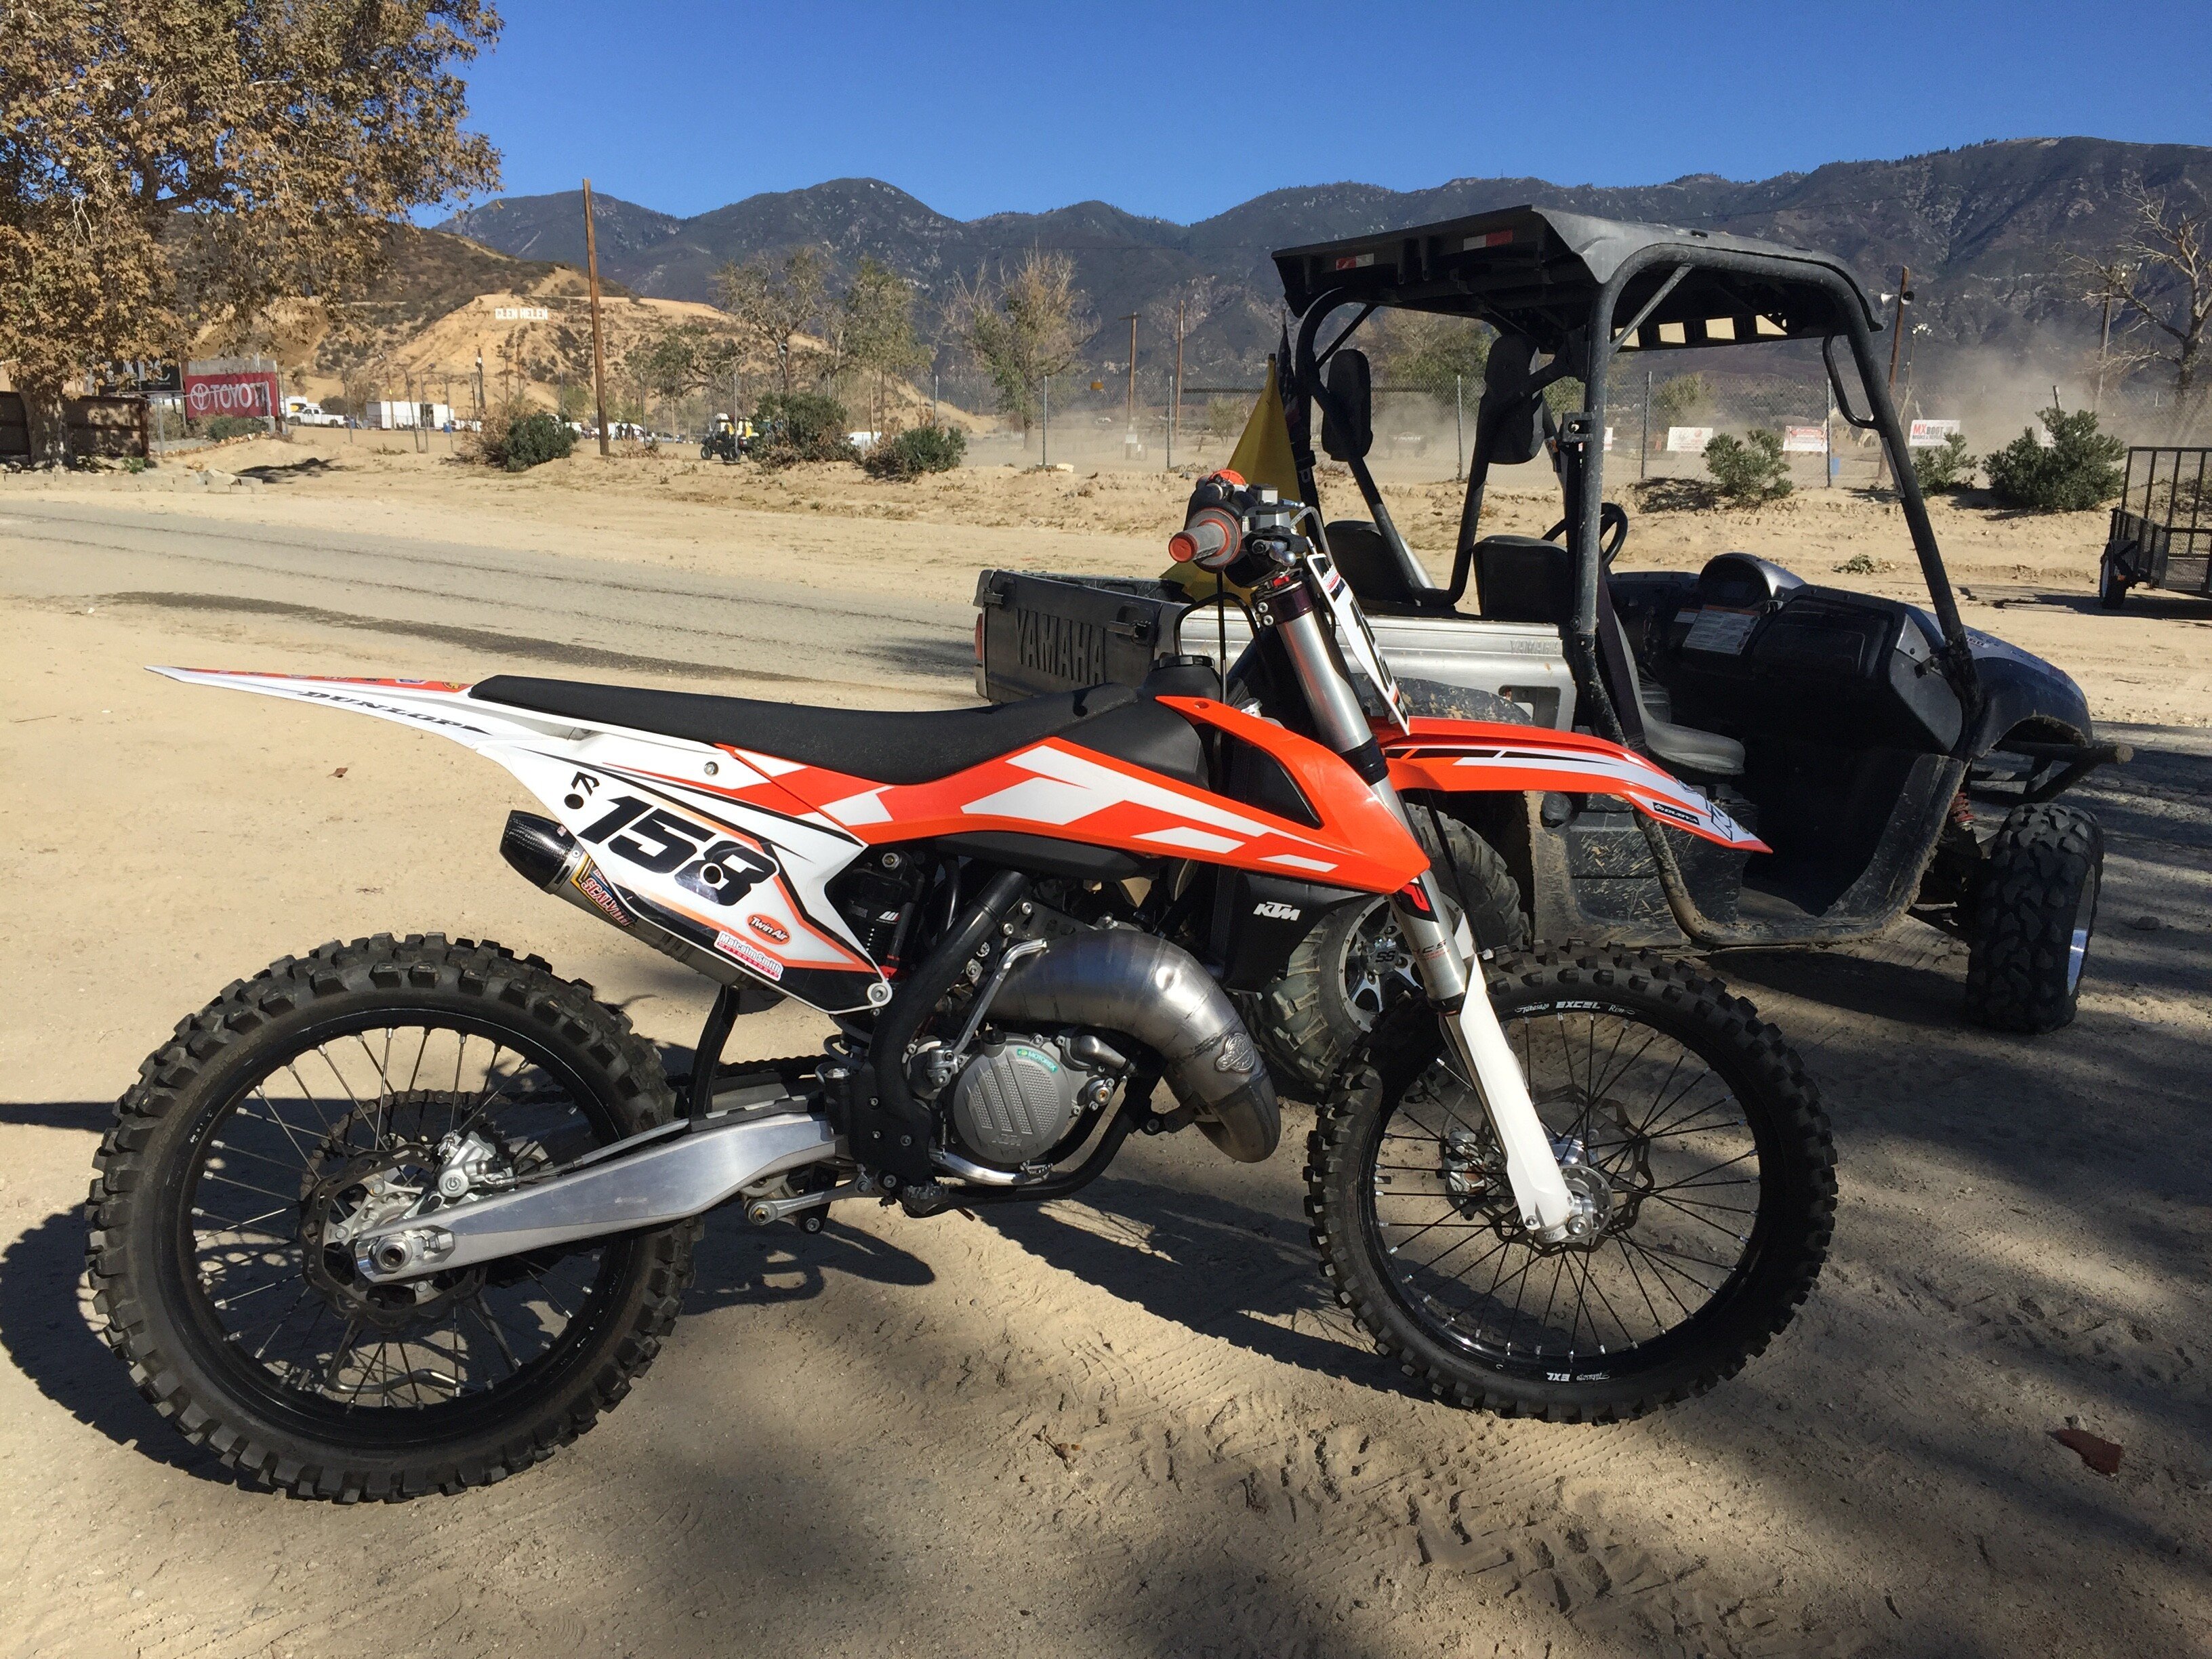 KTM Motorcycles for Sale